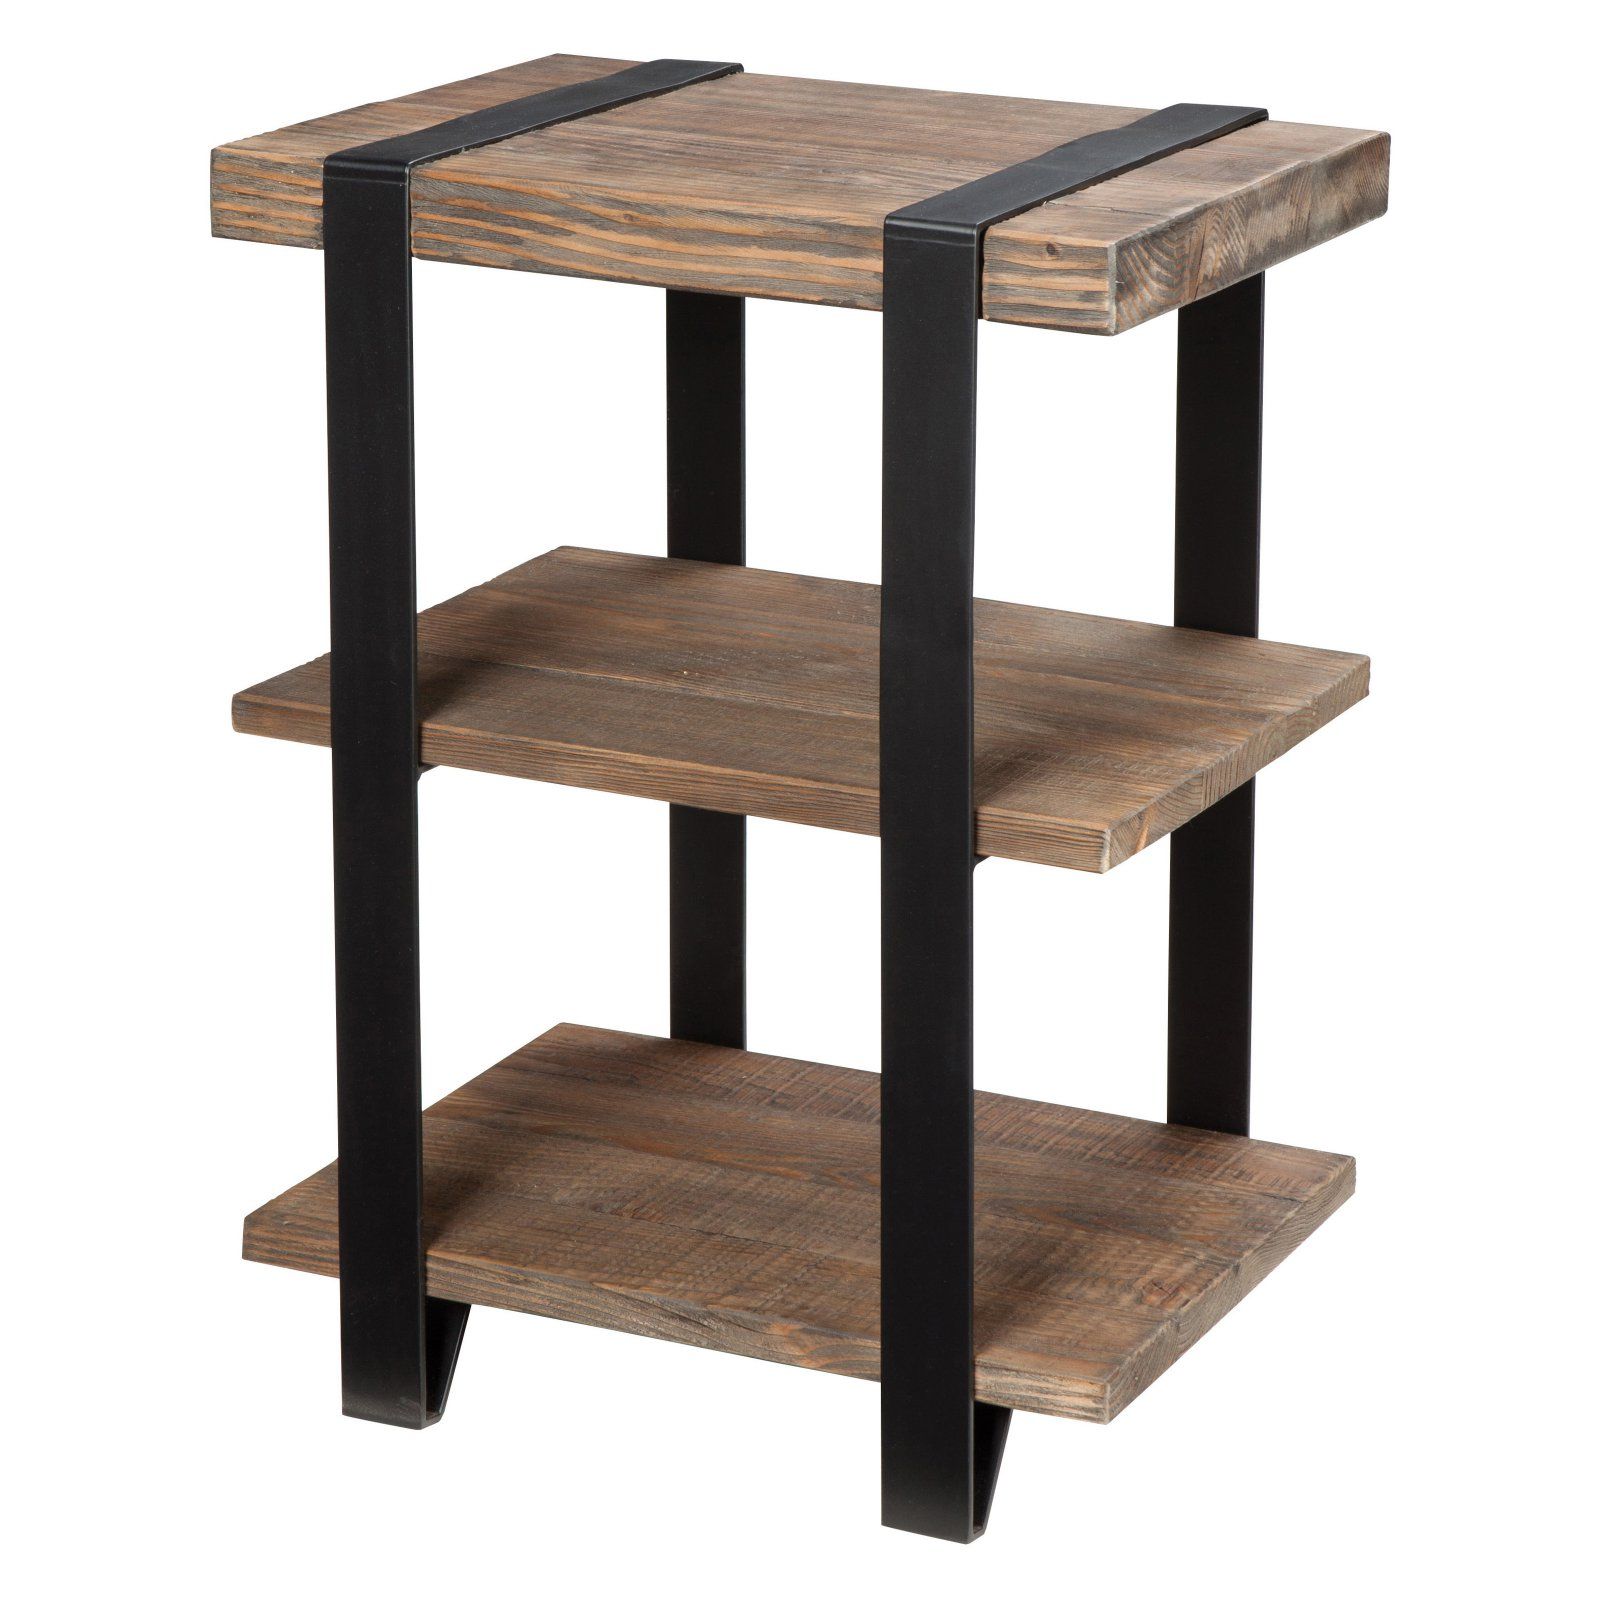 Natural Wood And Black 2 Shelf Desks Regarding Well Liked Modesto 2 Shelf Metal Strap And Reclaimed Wood End Table, Rustic (View 8 of 15)